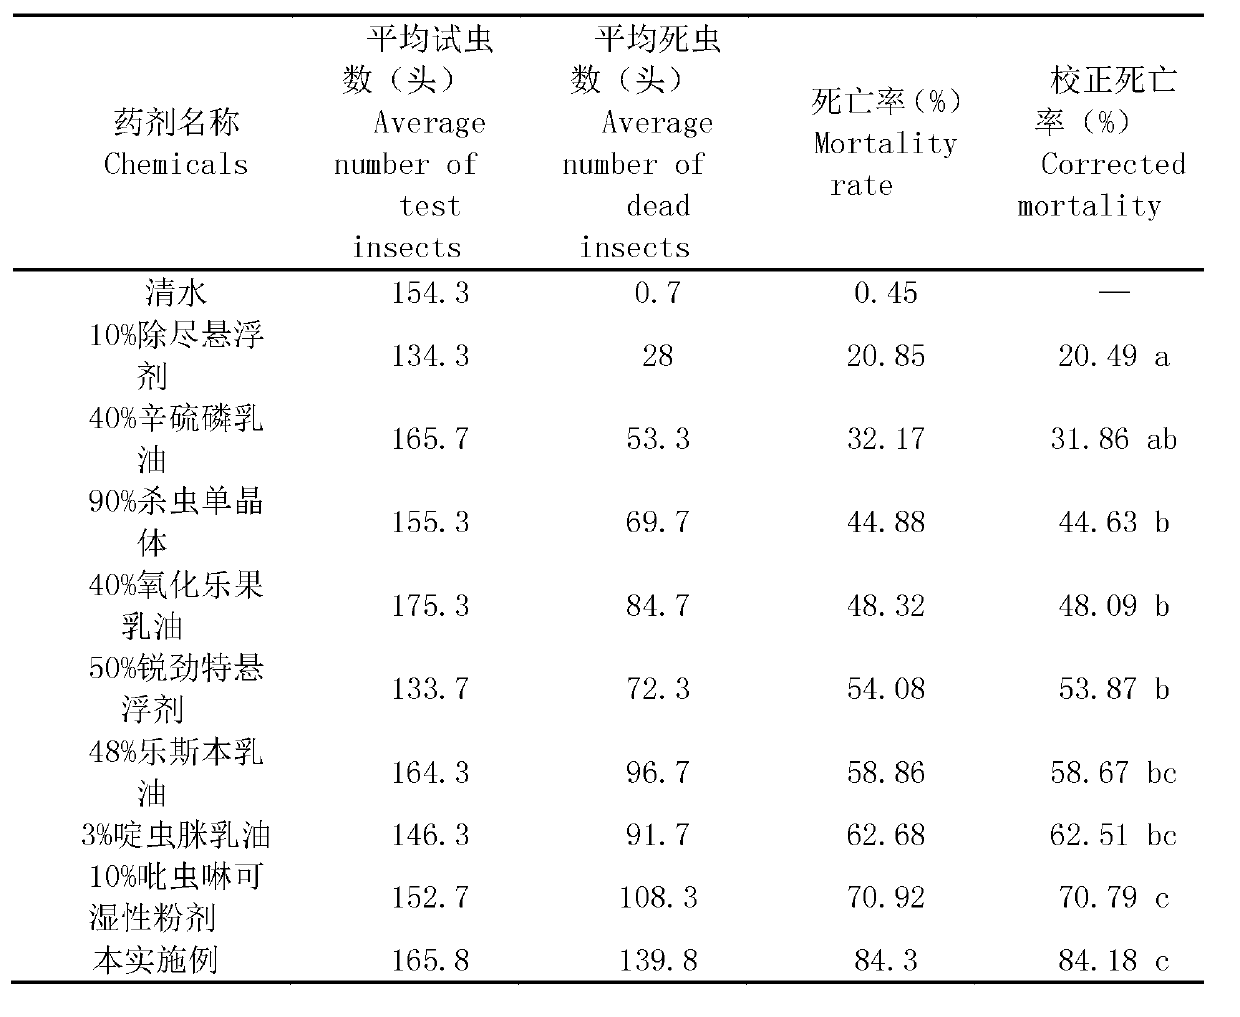 Acetamiprid complex pesticide for controlling pest of willow twig gall midge